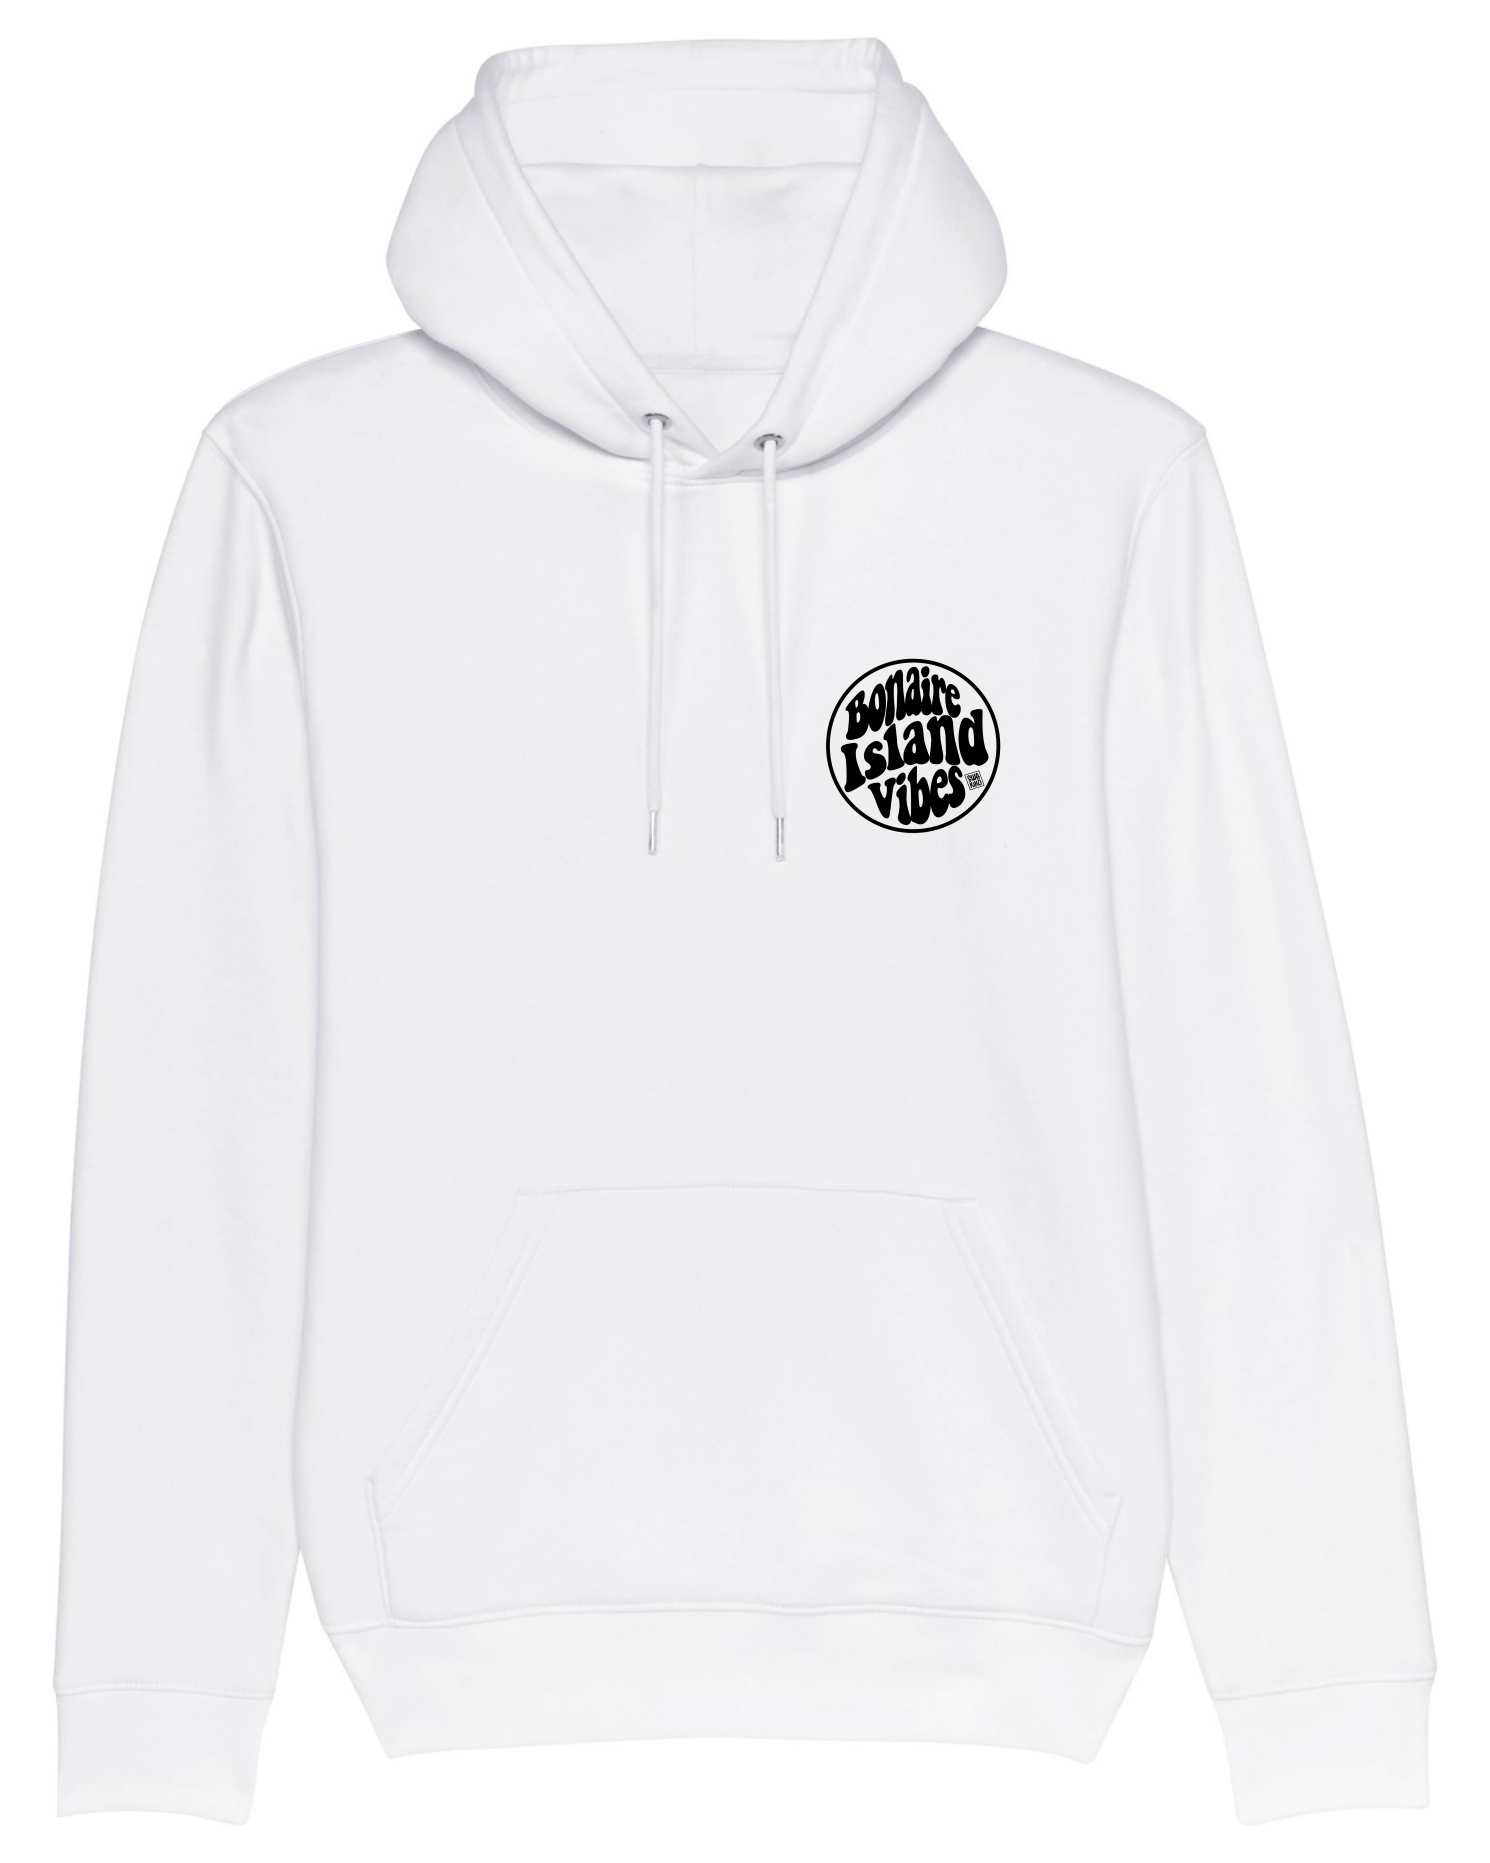 Hoodie white, Bonaire Island vibes front